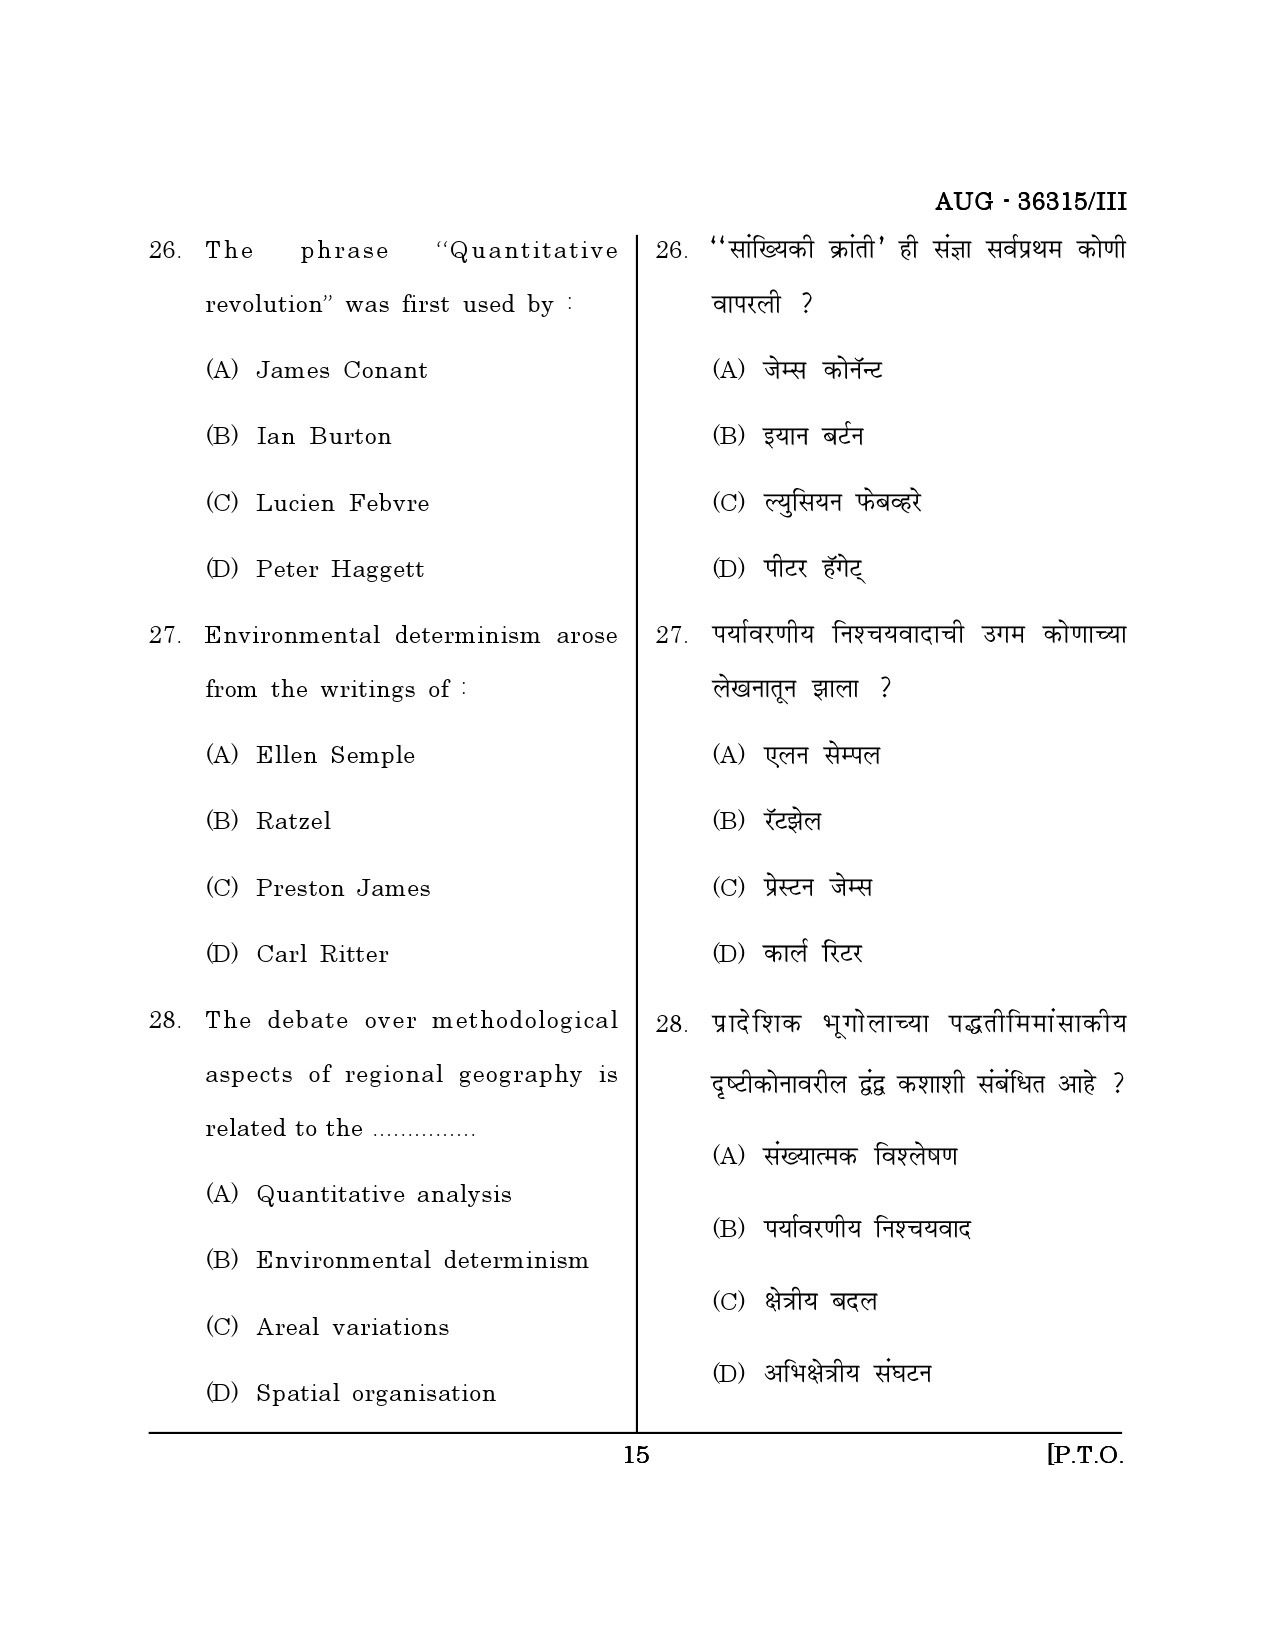 Maharashtra SET Geography Question Paper III August 2015 14